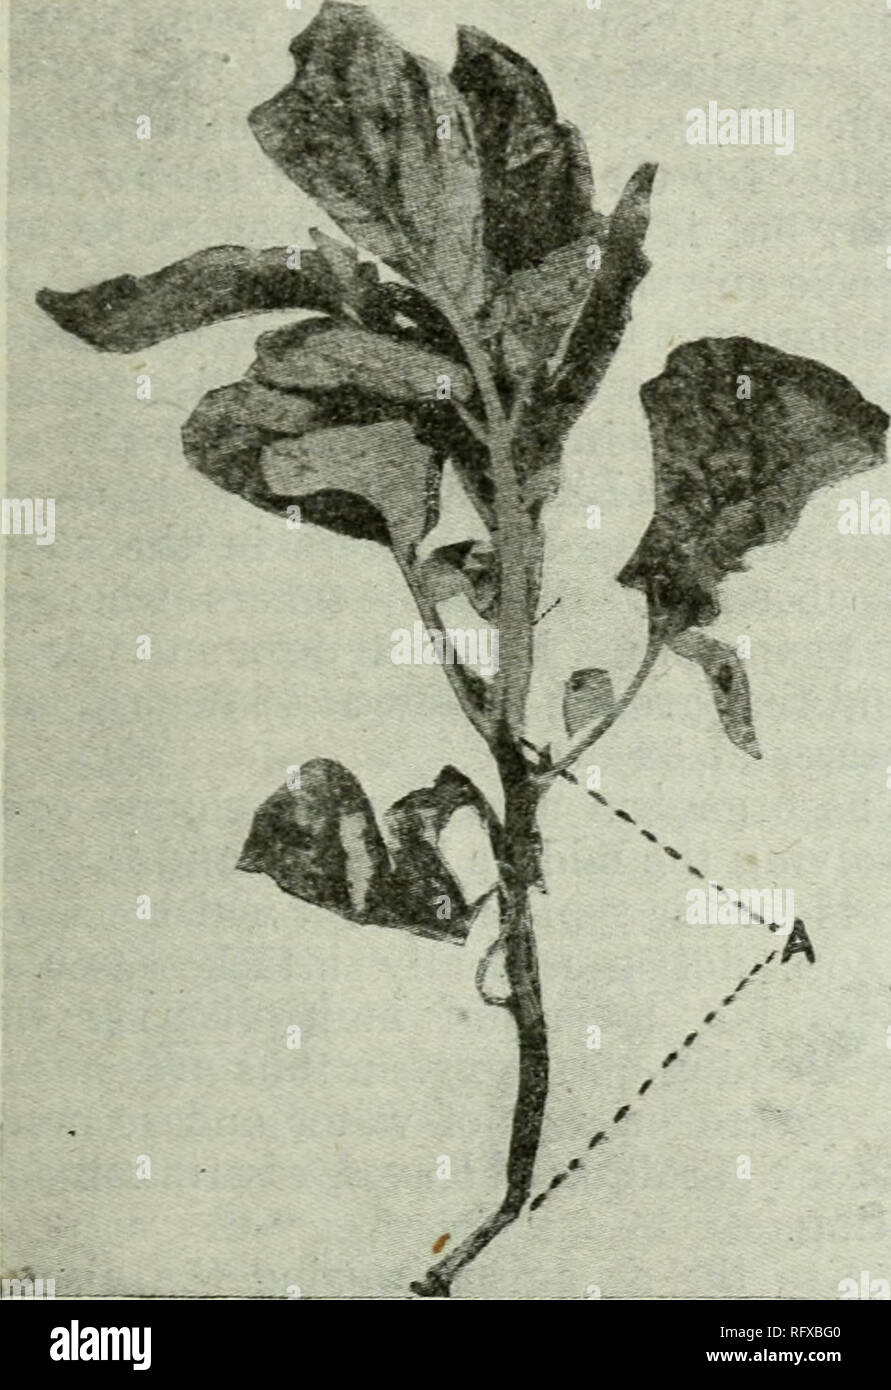 . Canadian journal of agricultural science. Agricultural Institute of Canada; Agriculture. January, 1922. SCIENTIFIC AGRICULTURE. 165 and the protuberance on the tuber. In root and stolon galls tiie parasite event- ually reaches the phloem in which most of the food manufactured is conducted and in this tissue most of the hypertrophy^ occurs. The tuber is somewhat modified because of its function as a large storage organ and the plasniodia do not, as a rule, reach the i)hl()em but attack cells of the hypo- ilermis and cortex. Where a cell is covered by a Plasmodium, or part of one, the wall swe Stock Photo